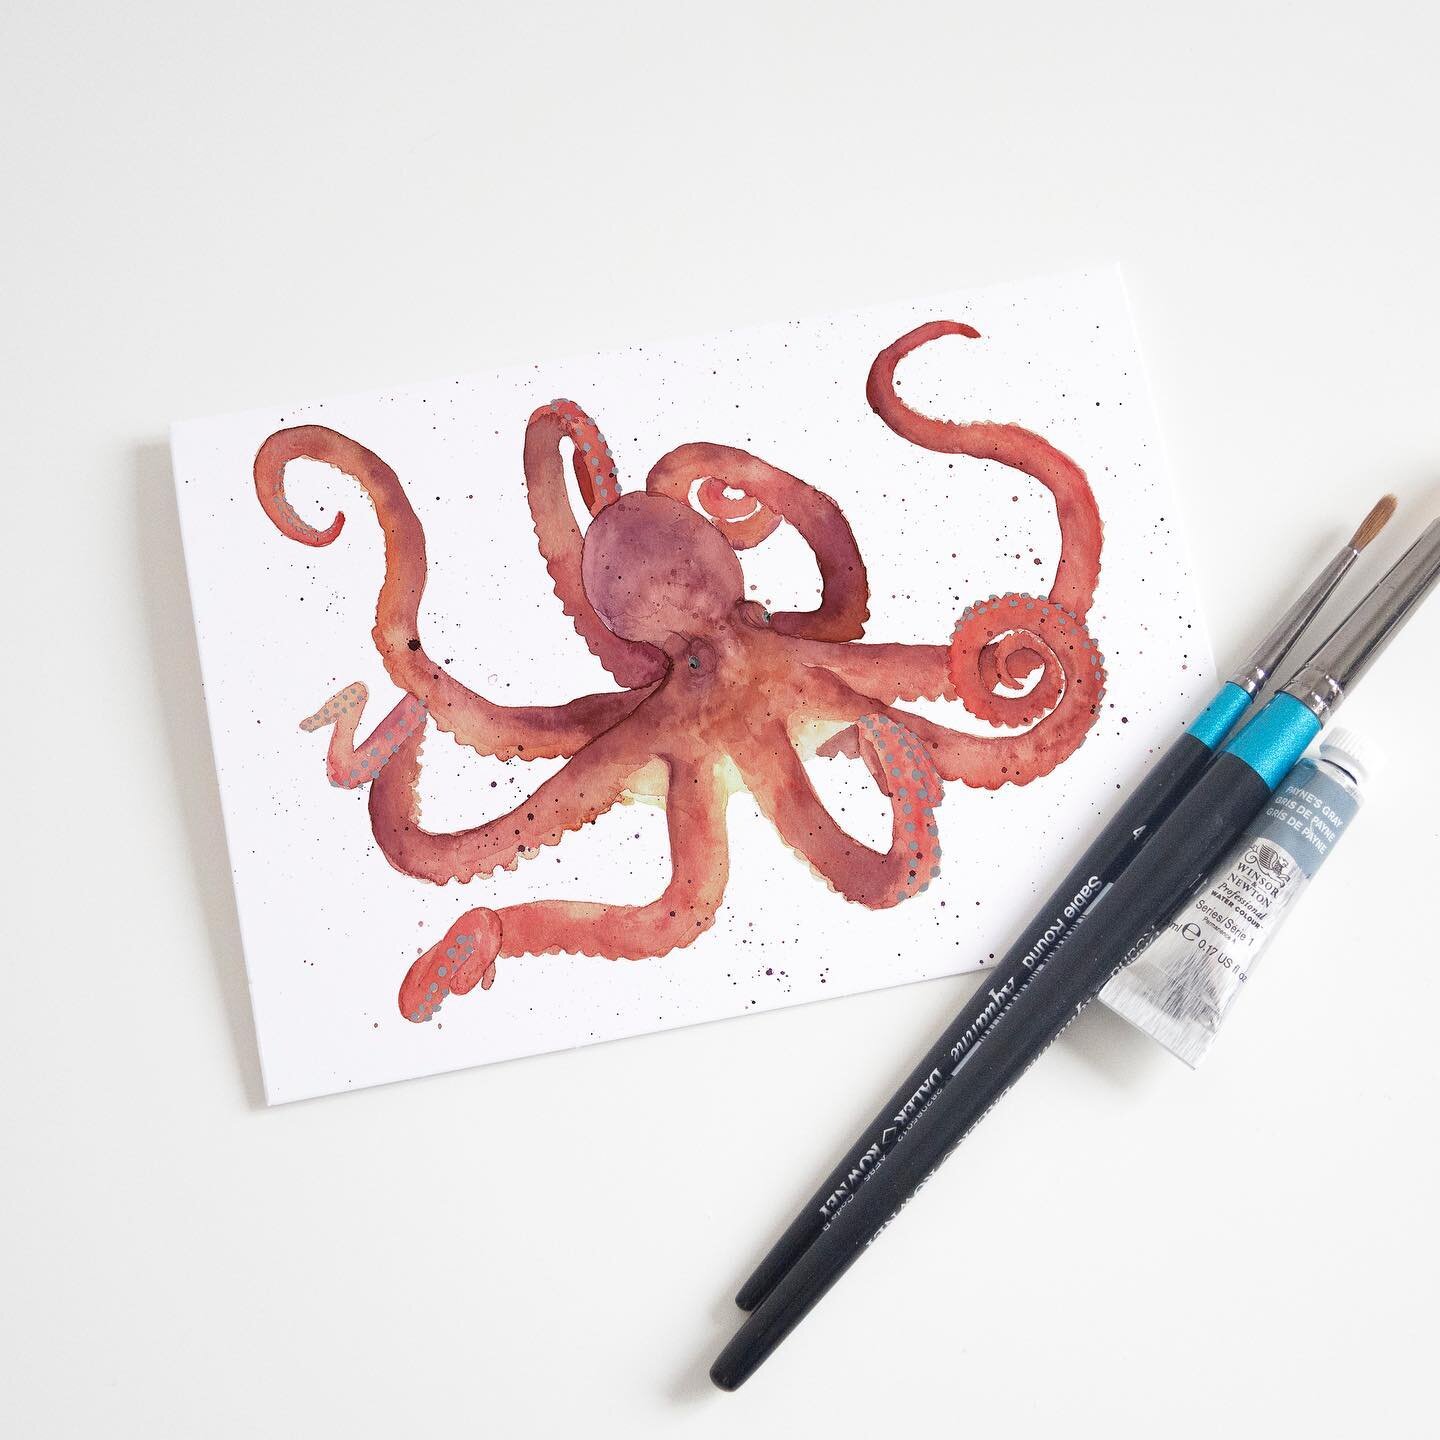 Wishing I was an octopus with 8 arms to juggle the busy weeks I&rsquo;ve had recently!
.
The website and Etsy shop are currently &lsquo;on holiday&rsquo;, things will reopen from the 6th July, and website orders will begin to be shipped from then. I 